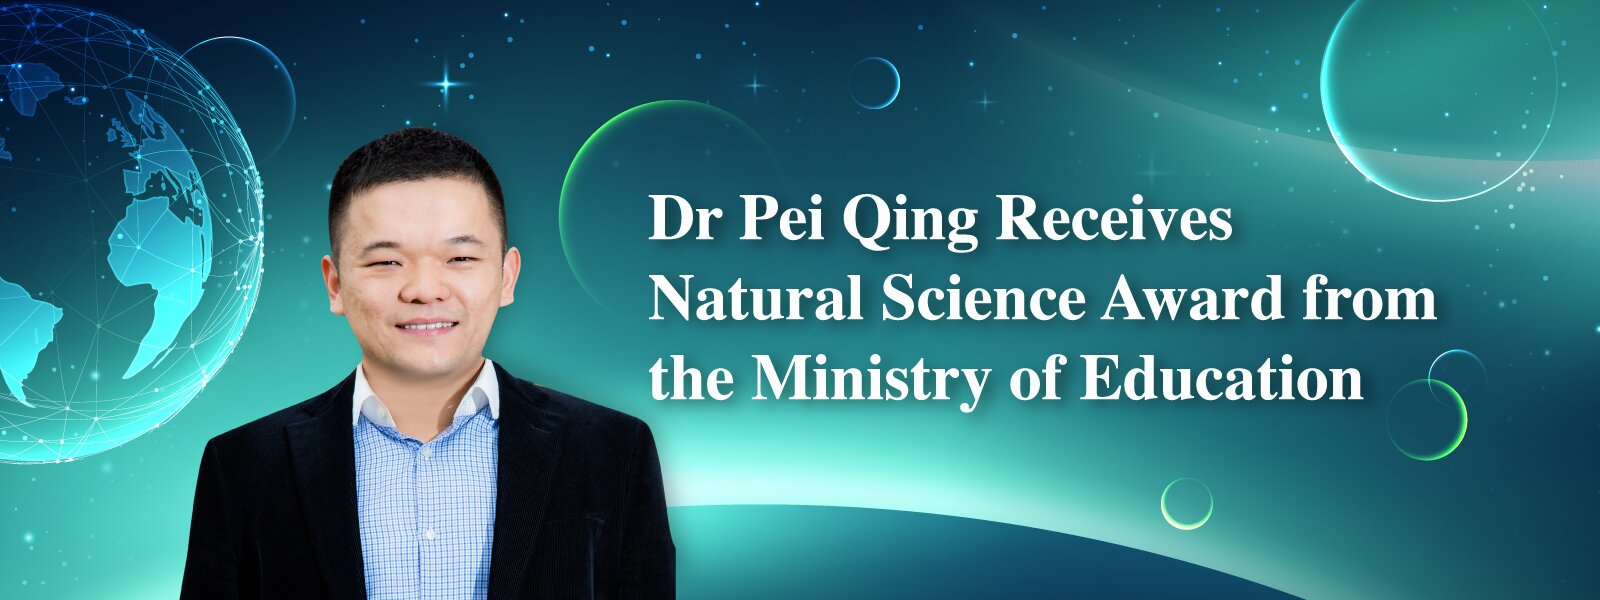 Dr Pei Qing Receives Natural Science Award from the Ministry of Education